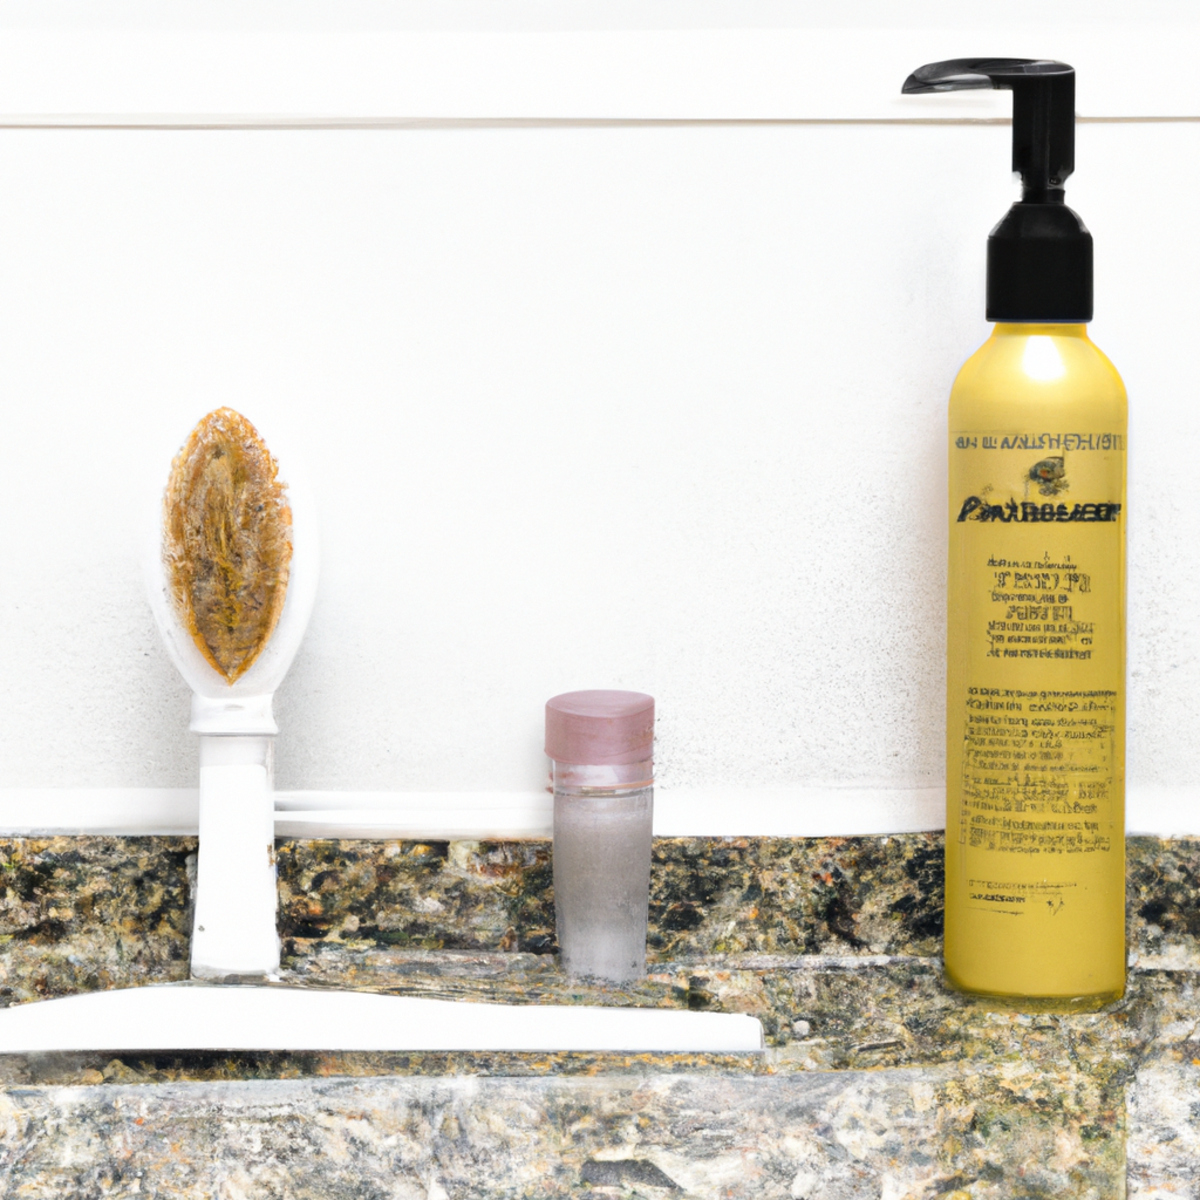 Sleek bathroom countertop with hair loss treatment objects: hair growth serum, comb, brush, mirror, hairdryer, towel. Optimistic and inviting.